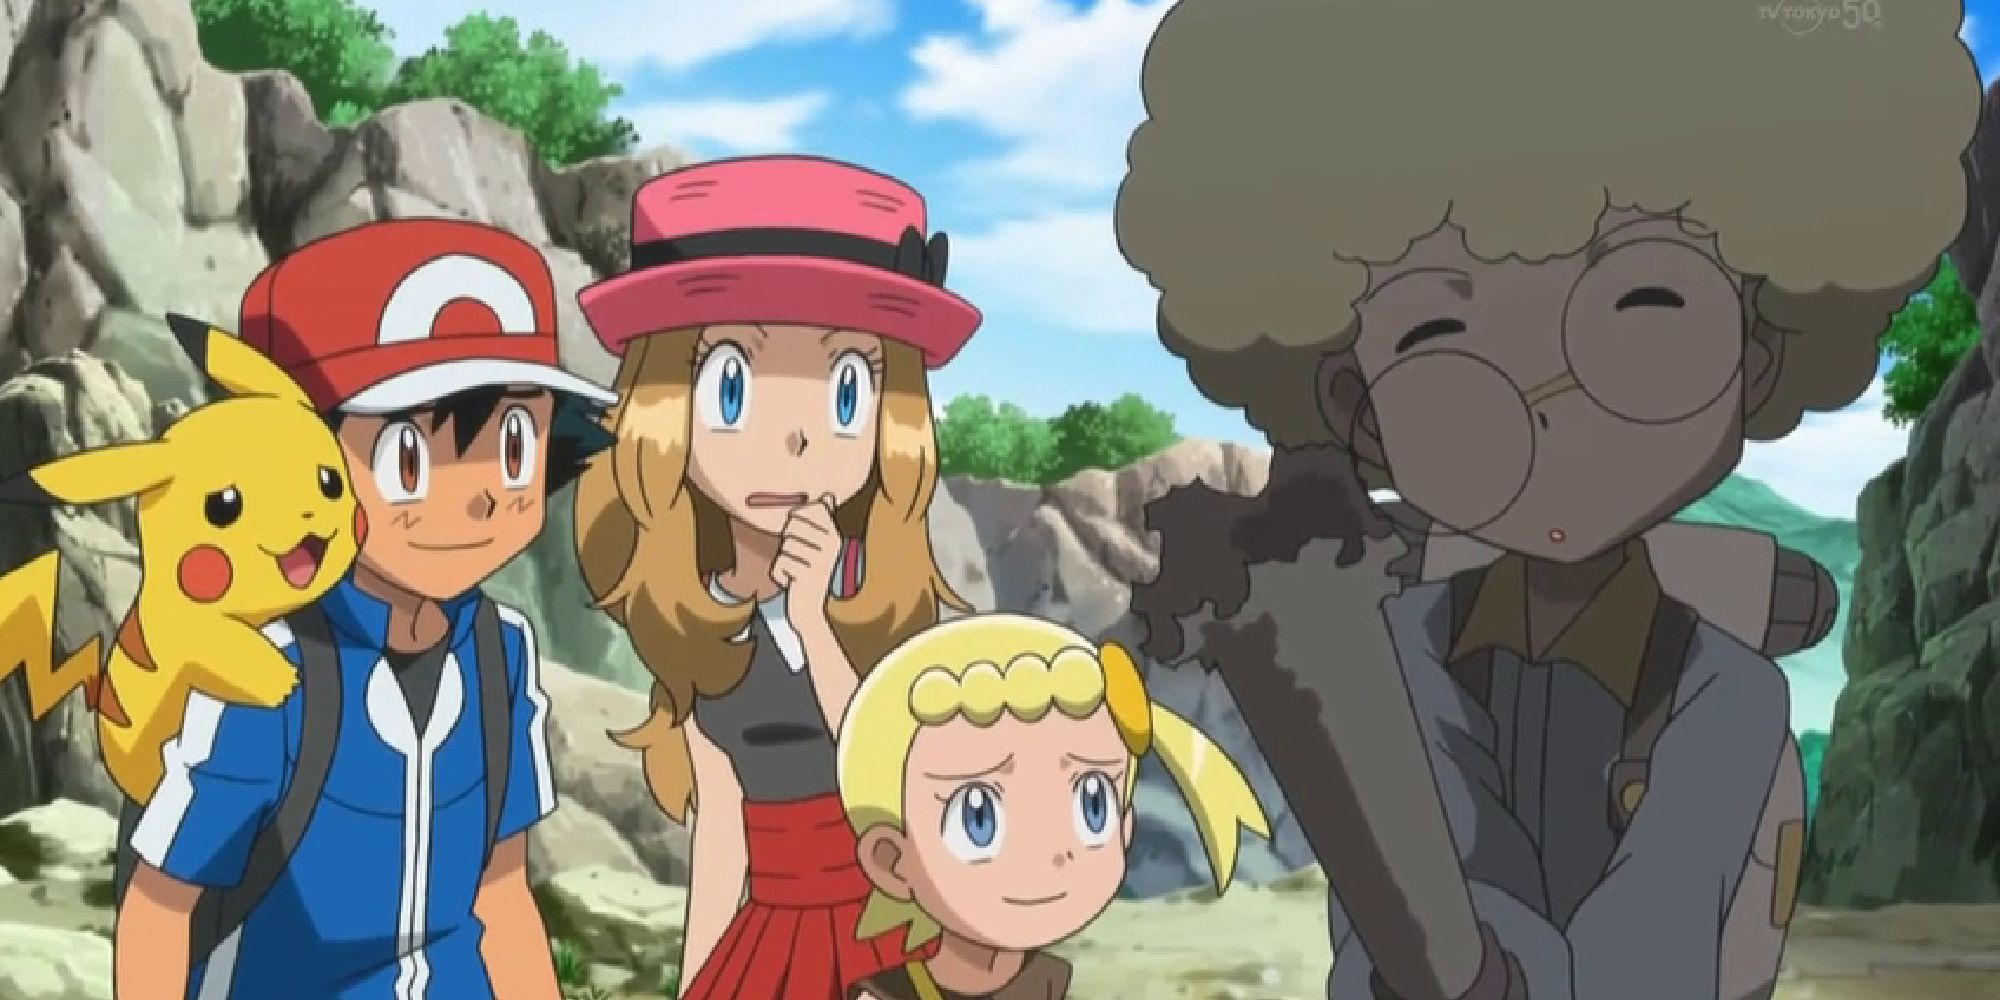 An exploded Clemont being laughed at by Ash, Pikachu, Serena, and Bonnie